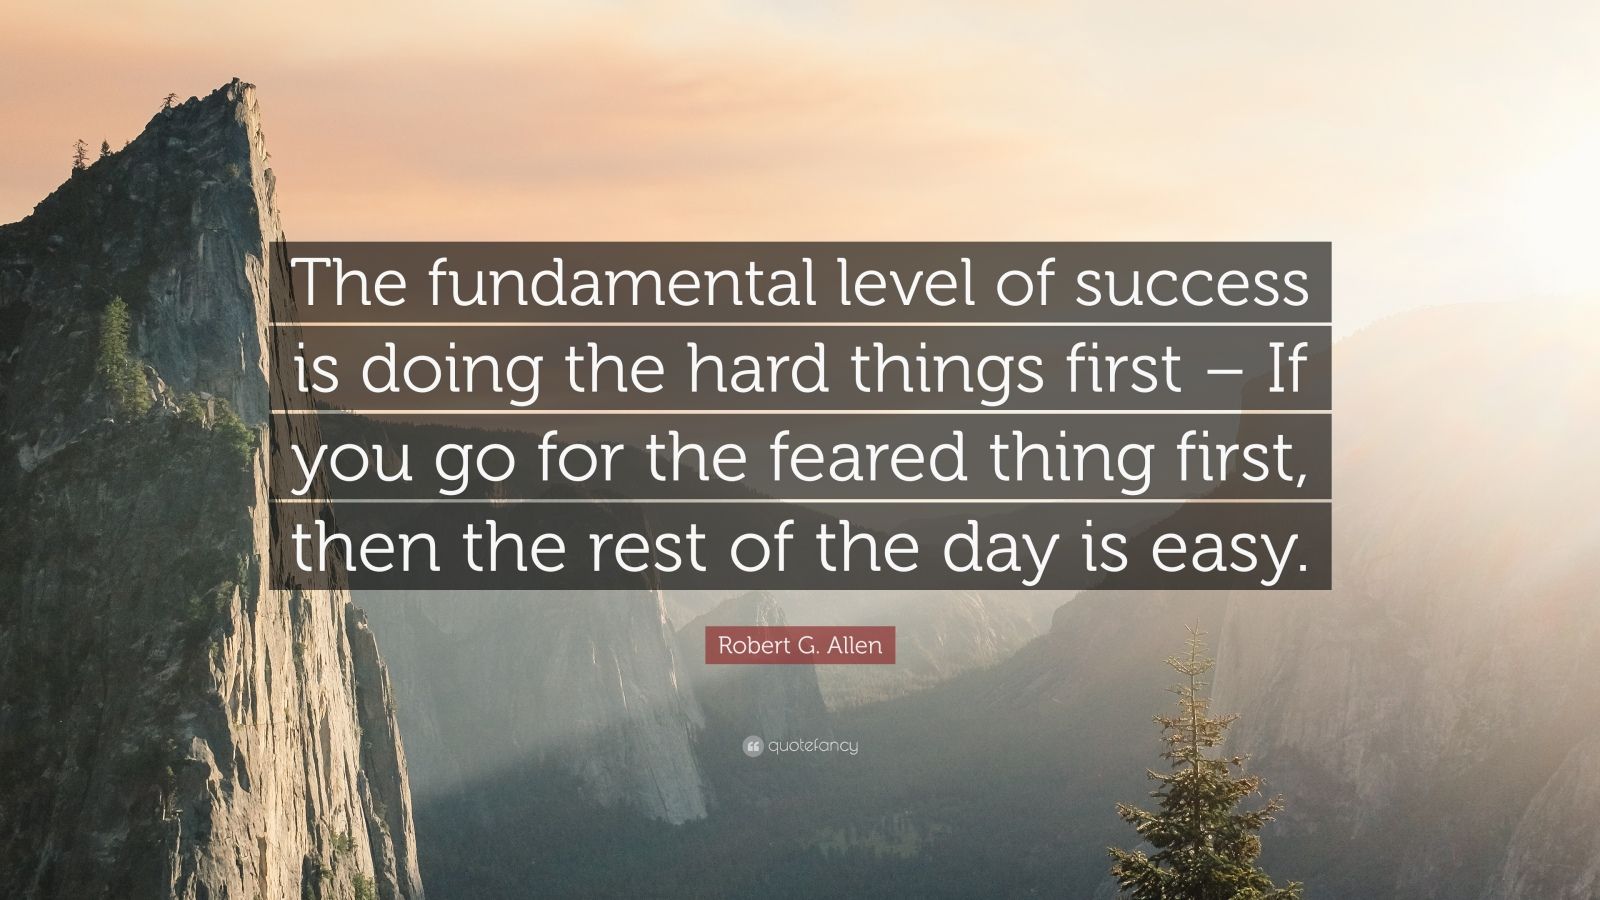 Robert G. Allen Quote: “The fundamental level of success is doing the